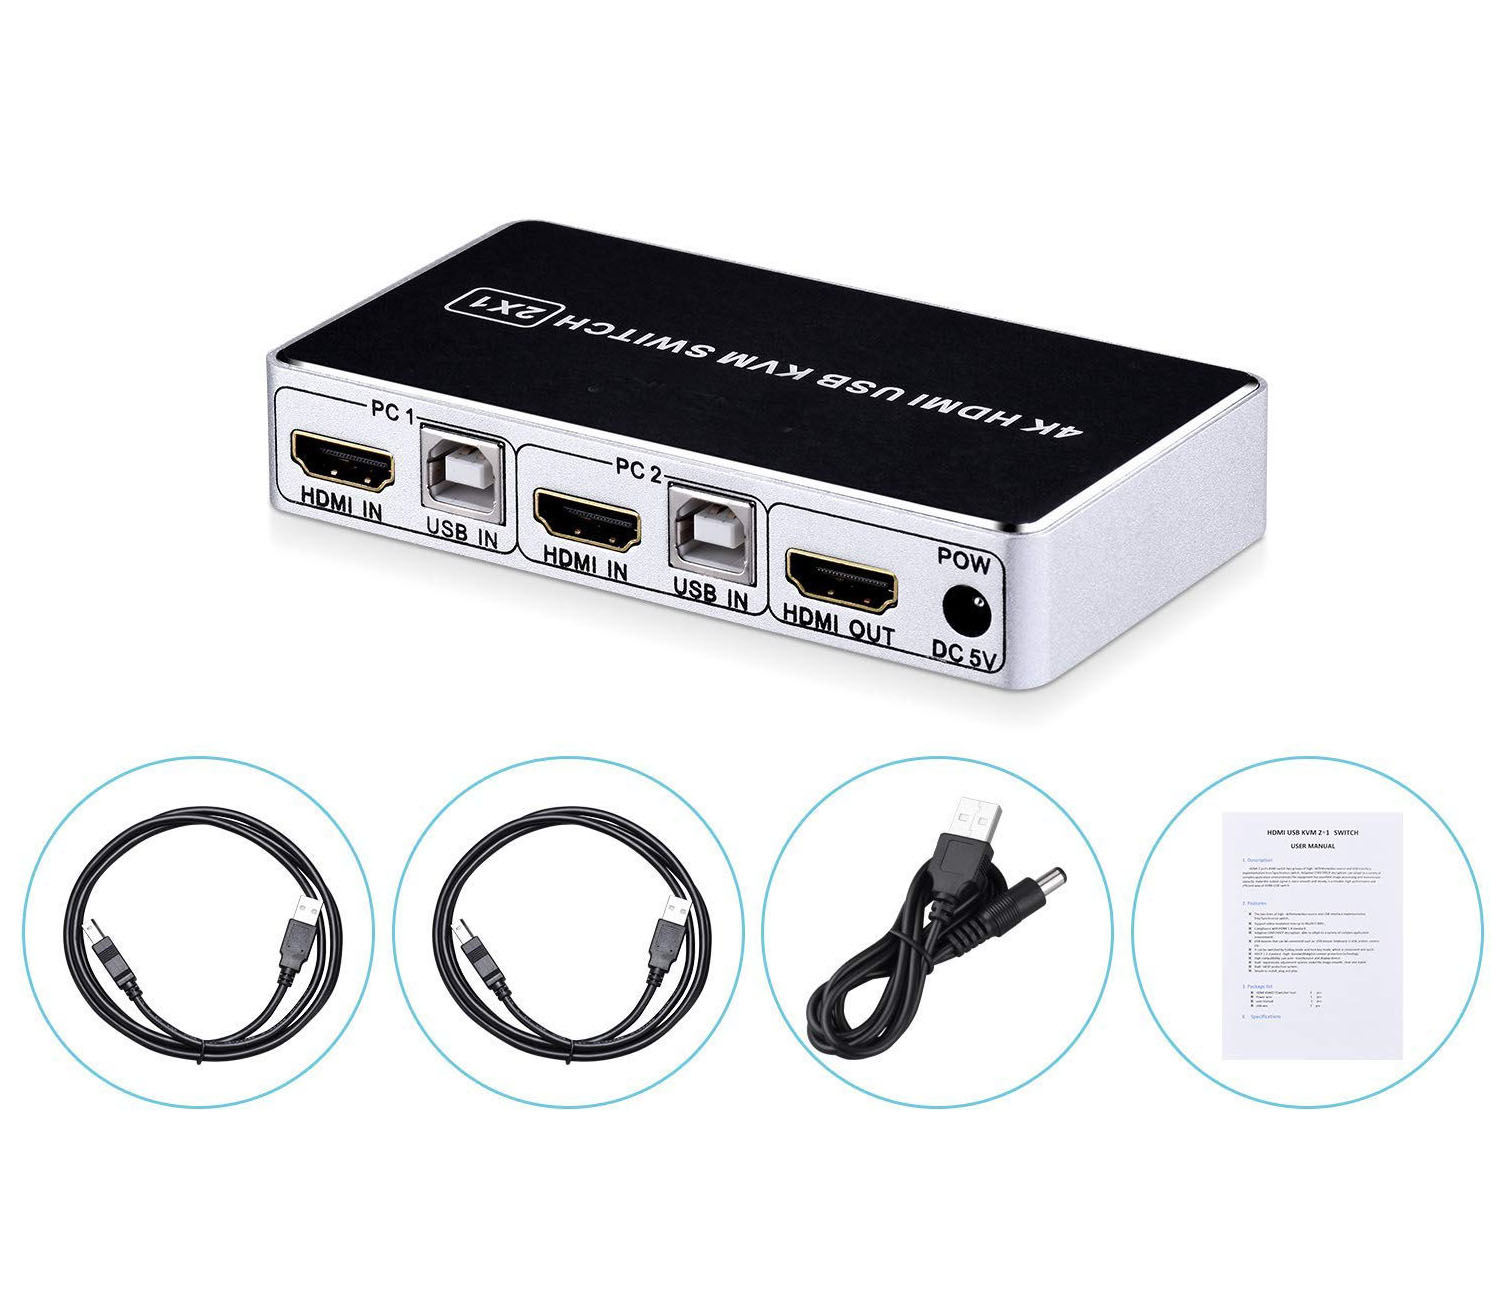 4K 2 Port HDMI KVM Switch Keyboard Mouse Switcher Include 2 USB Type-B Cable 4k@30HZ 3D for Laptop PS4 Xbox one HDTV Monitor